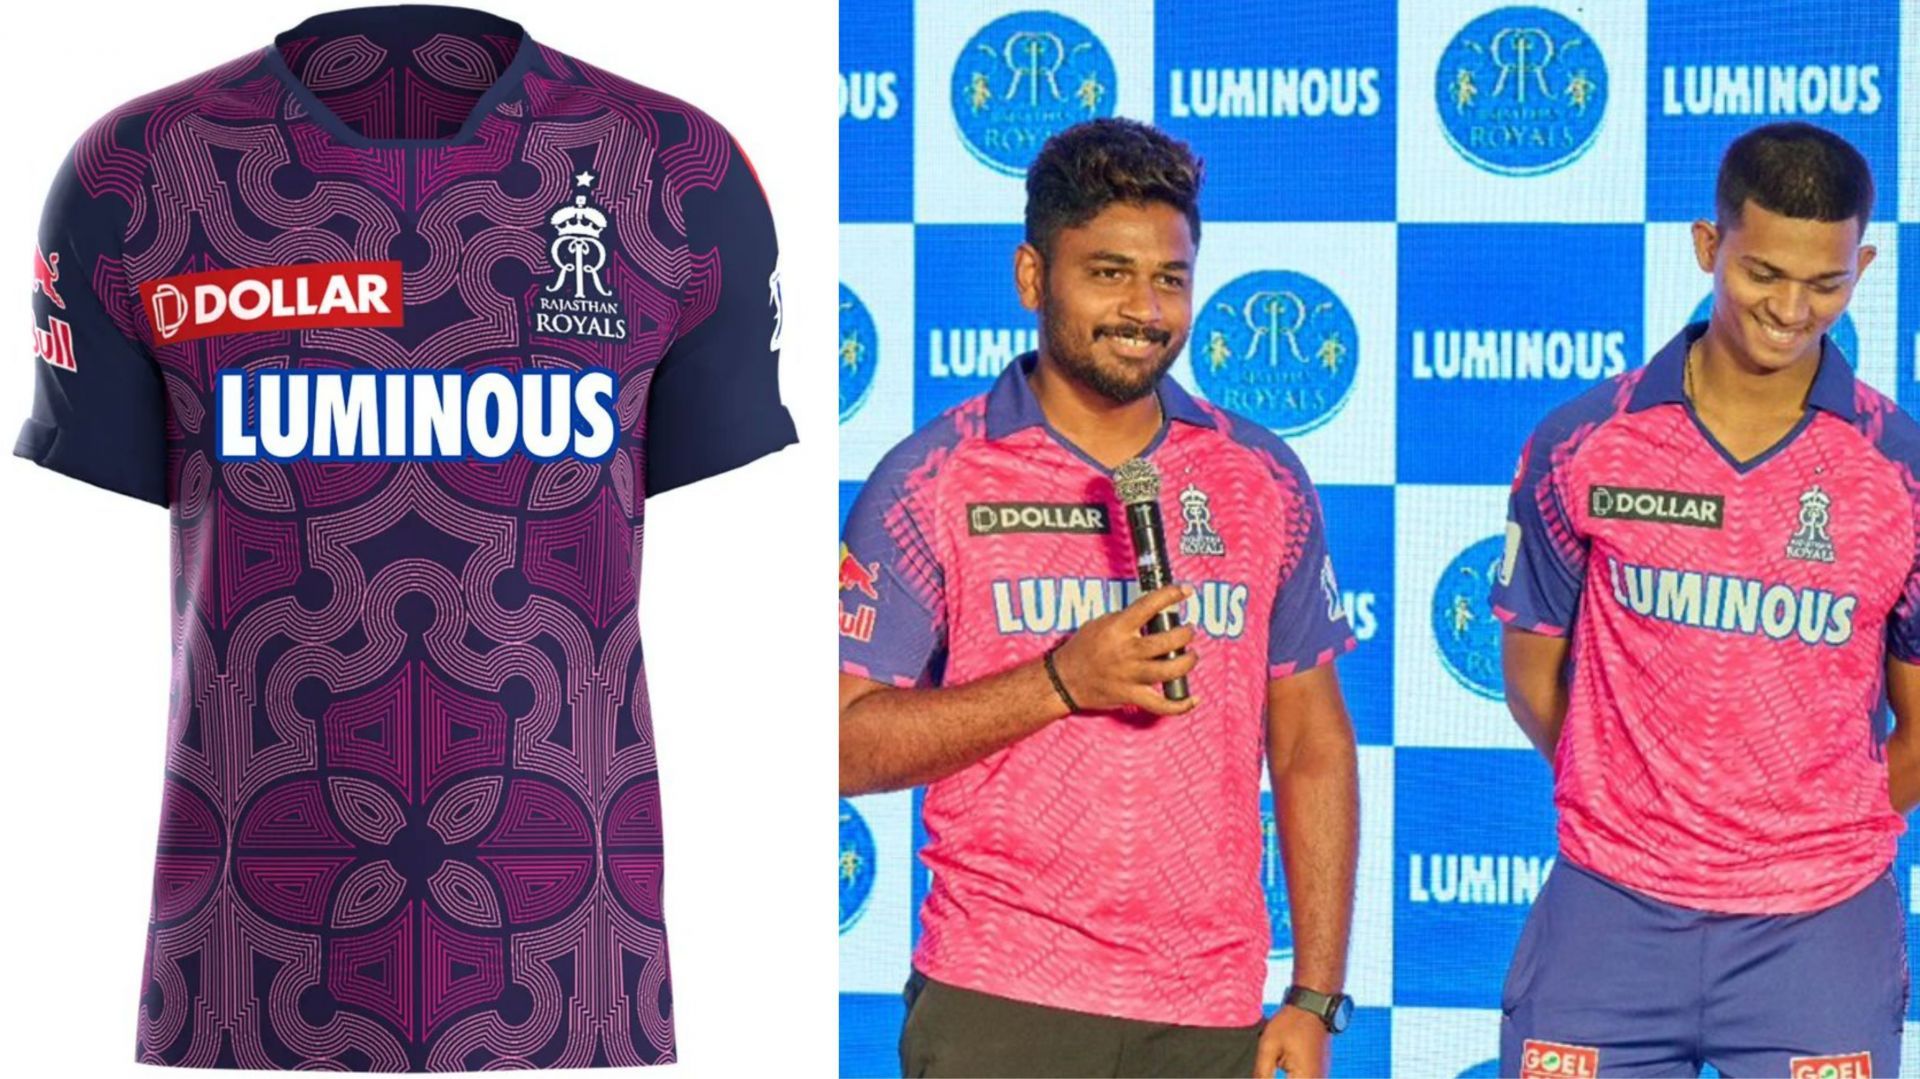 Rajasthan Royals will wear a pink jersey again (Image: Twitter/RR)